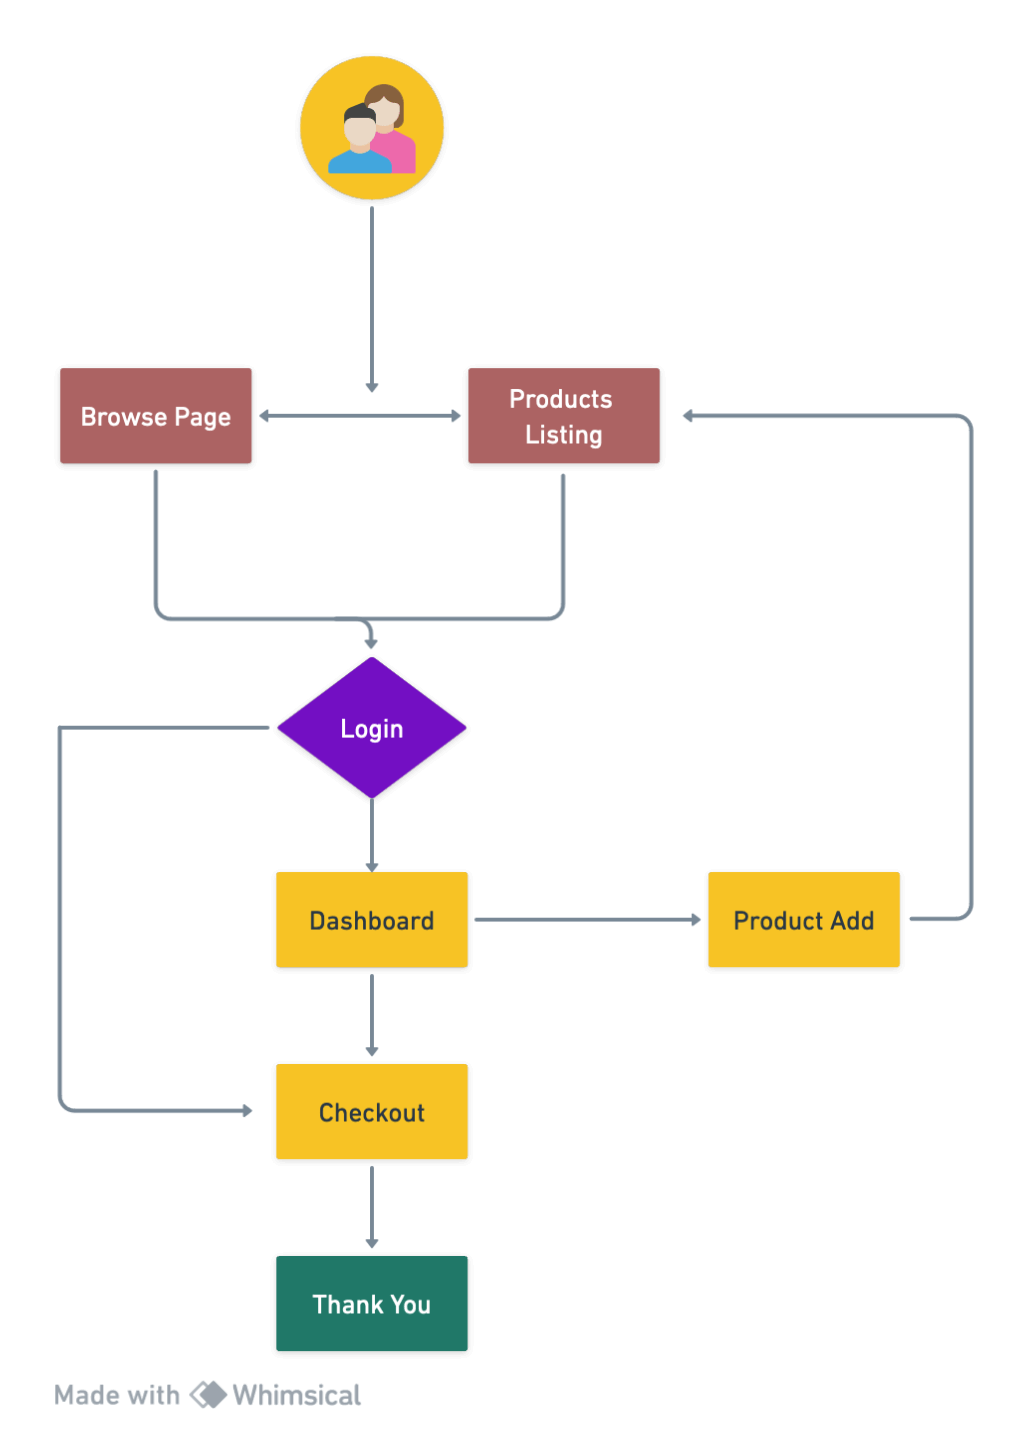 Architectural flow diagram of the digital products e-commerce app